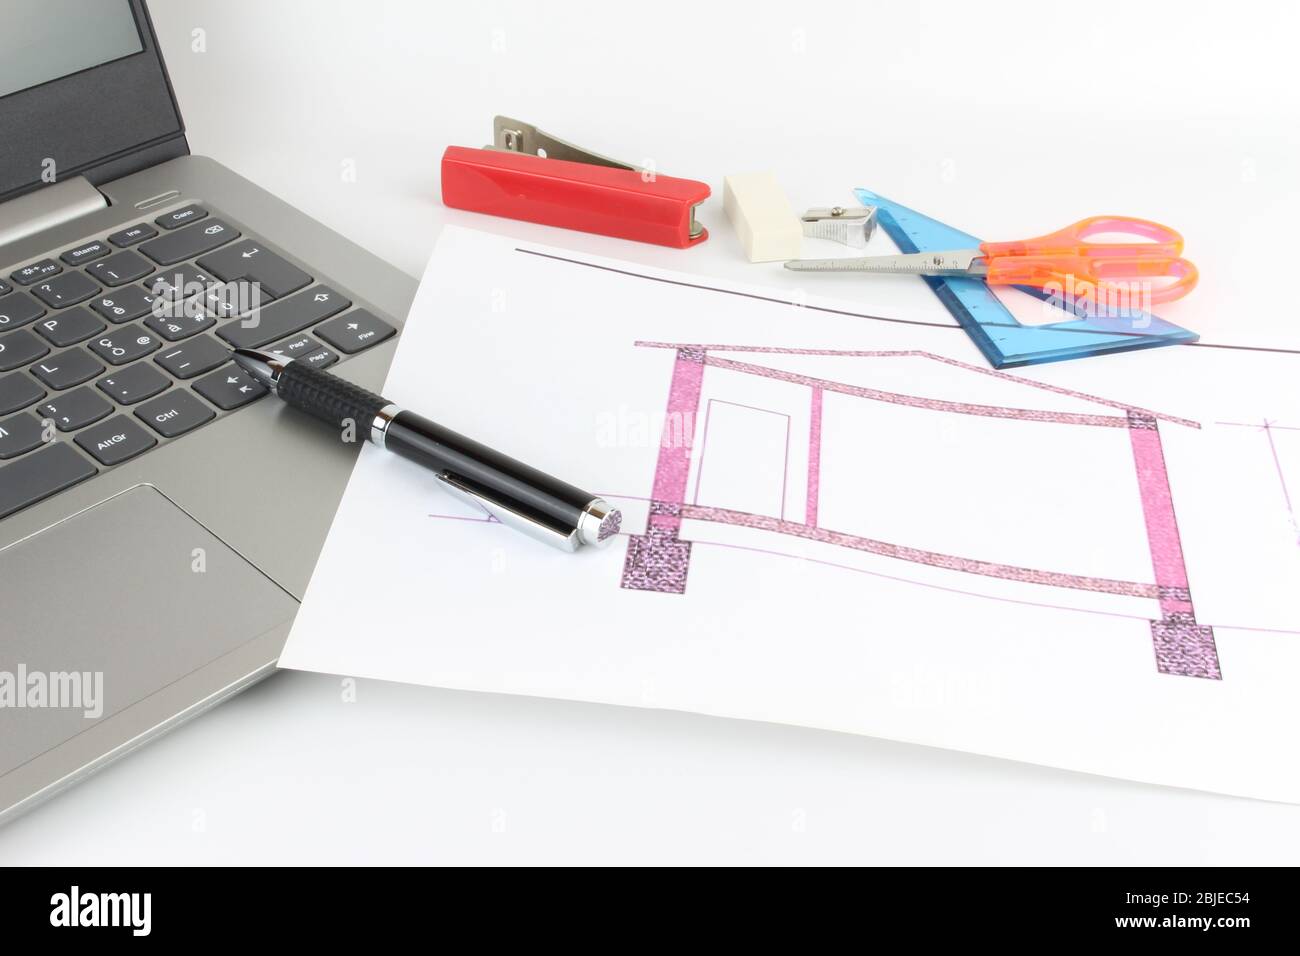 Design studio, with stationery and laptop. Sheet of white paper printed with a house drawing. Stock Photo